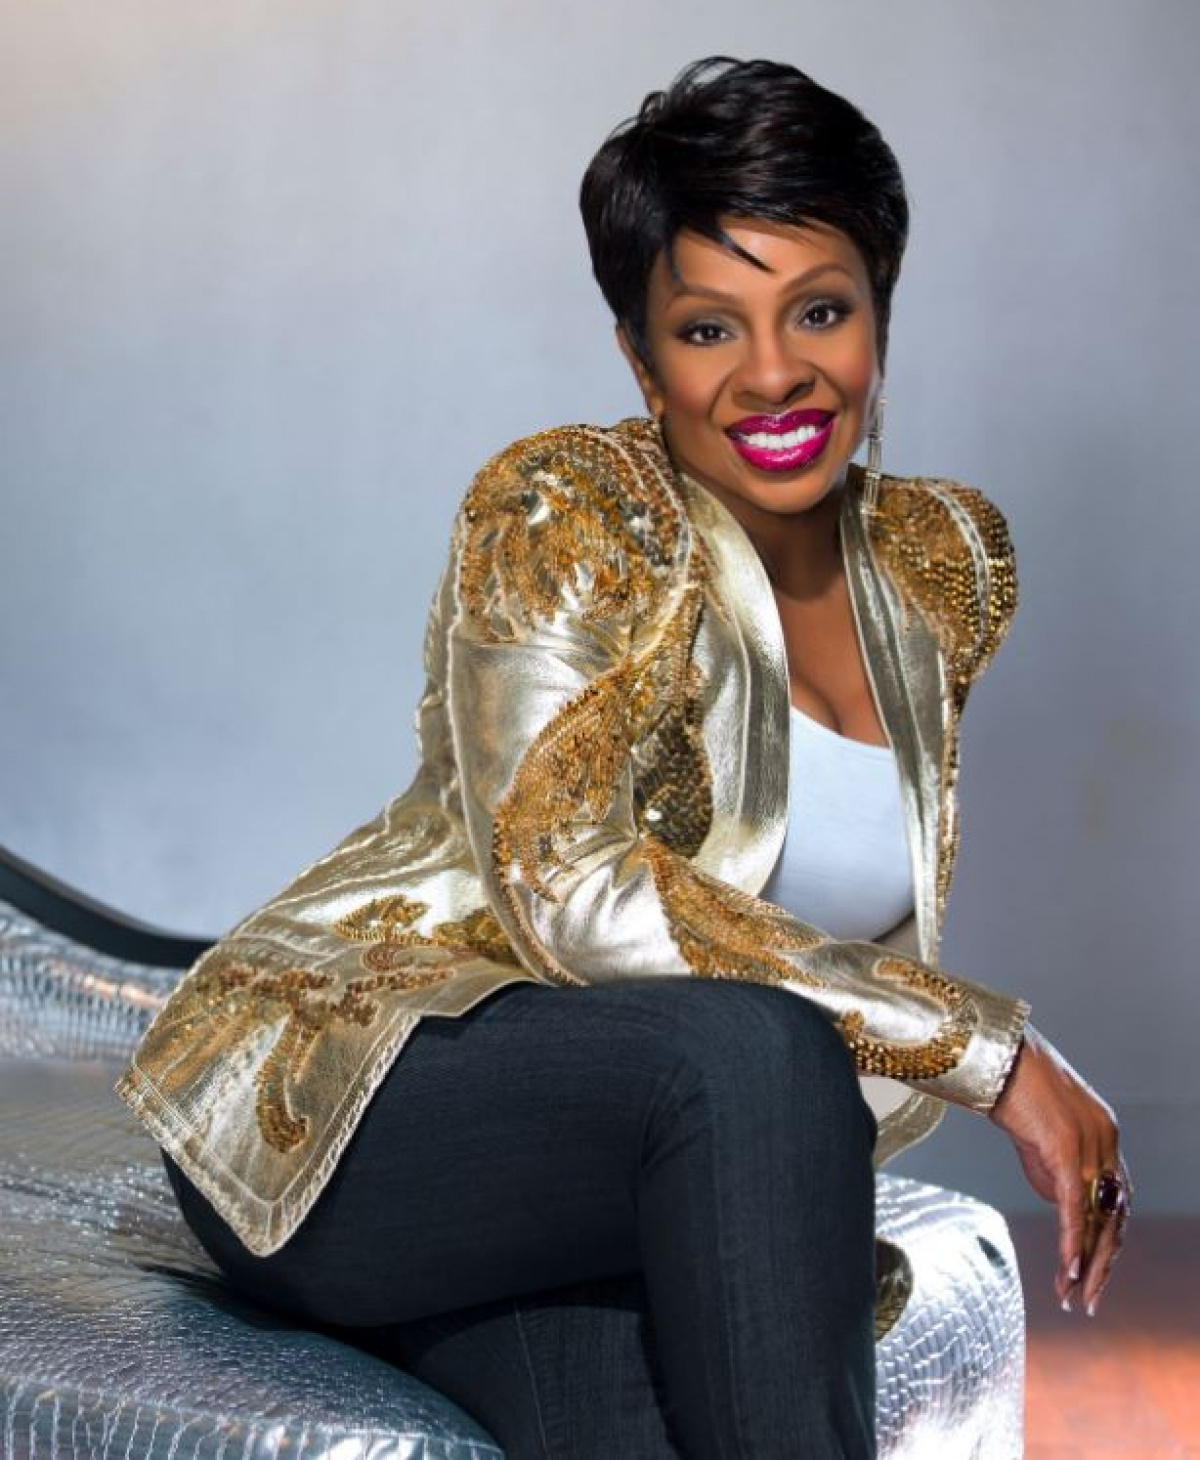 Gladys Knight: An Evening in Concert